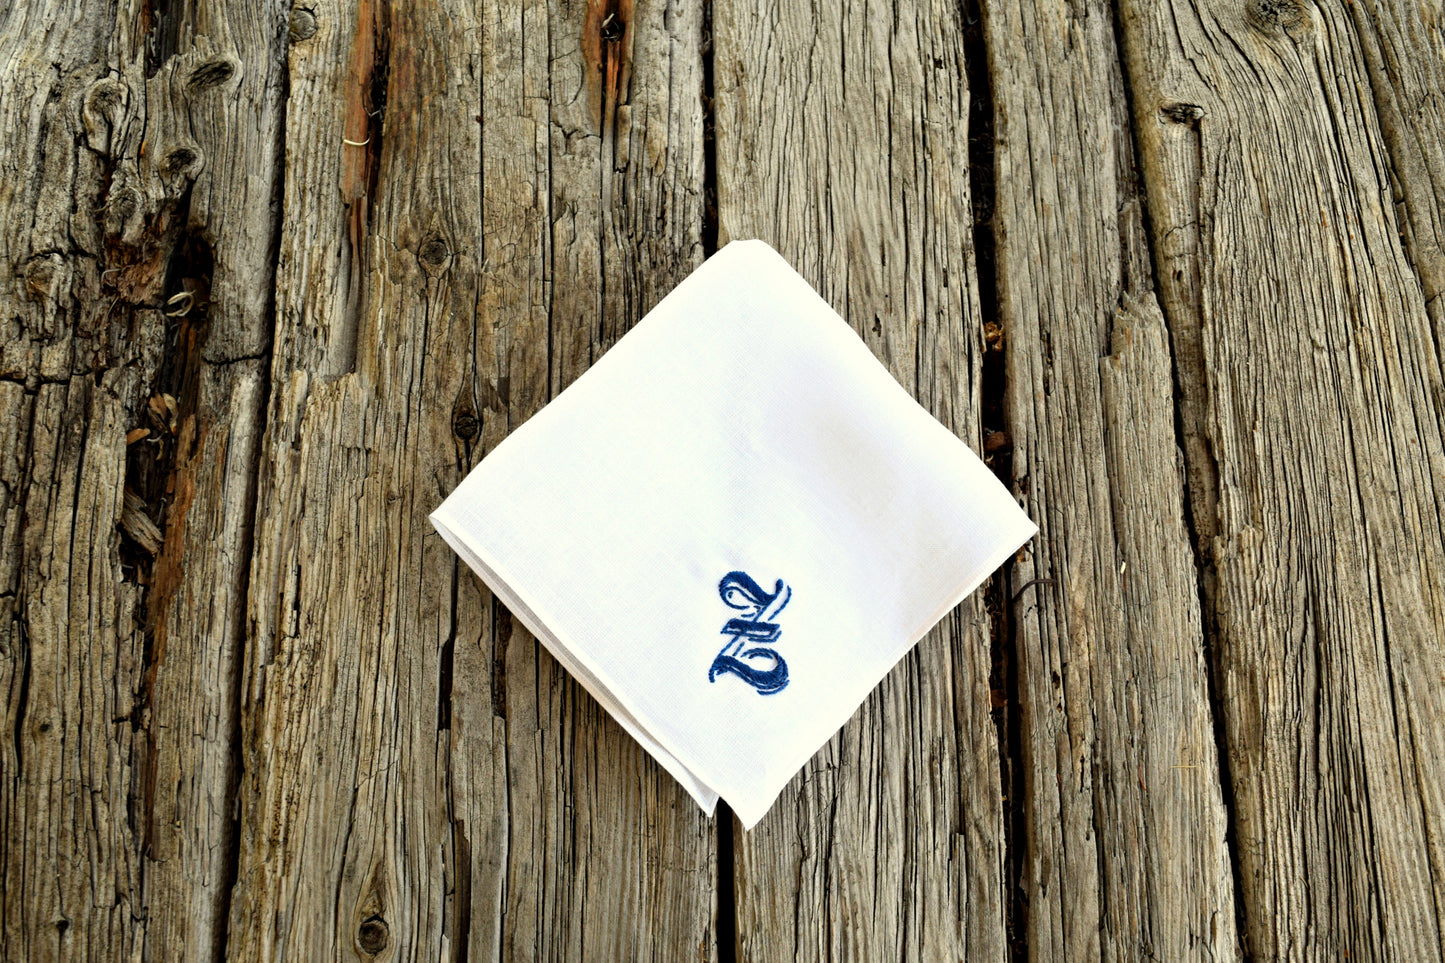 Irish linen handkerchief with ornate letter hand embroidered in blue